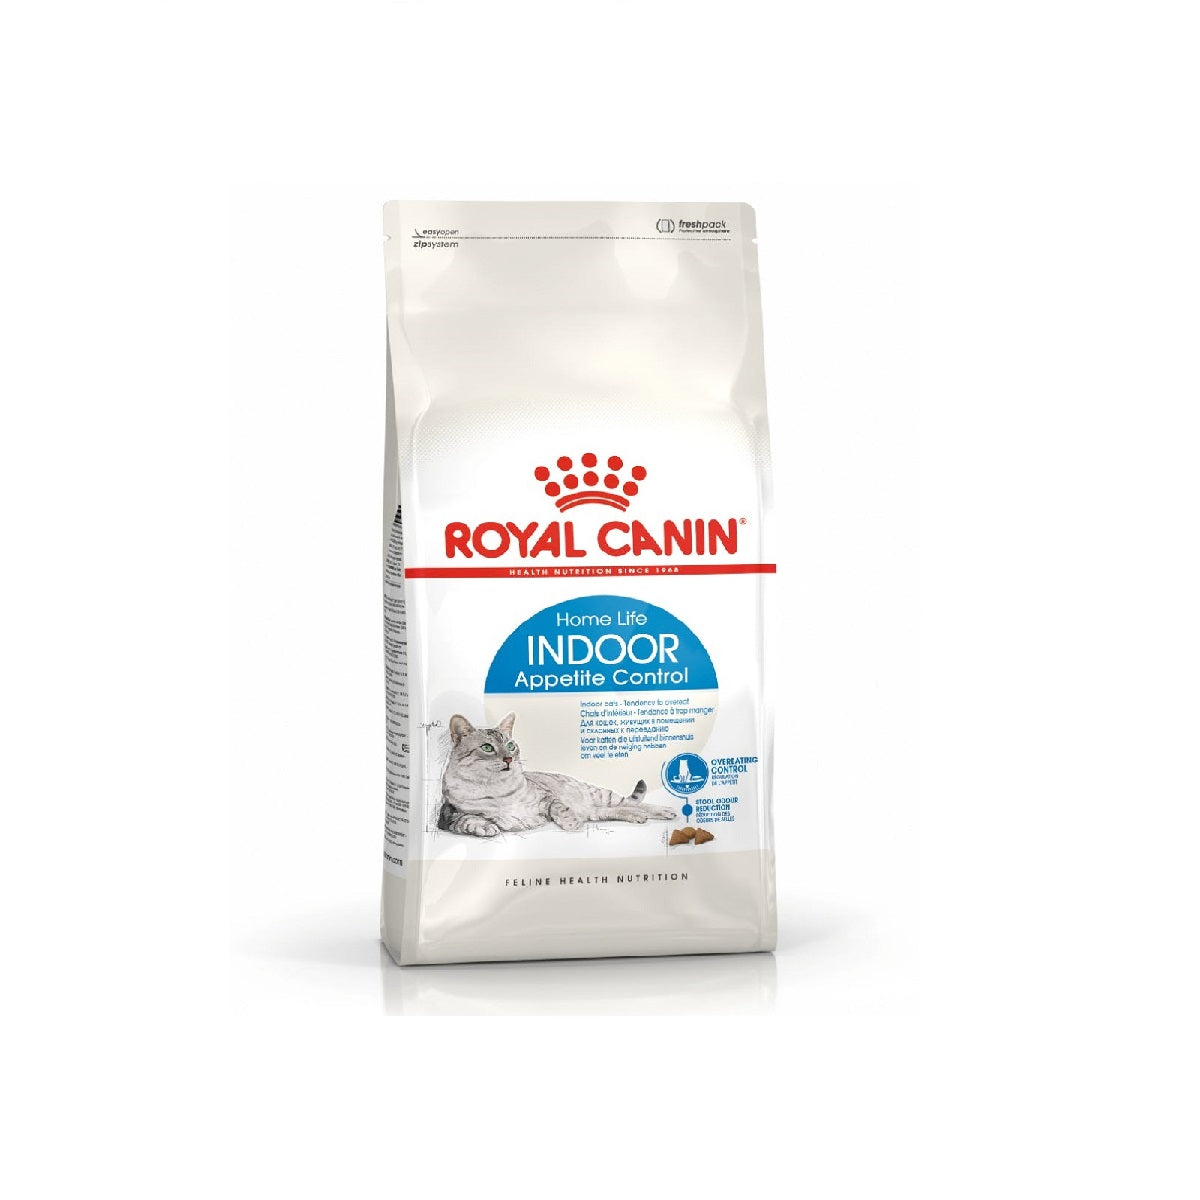 ROYAL CANIN - Indoor Appetite Control